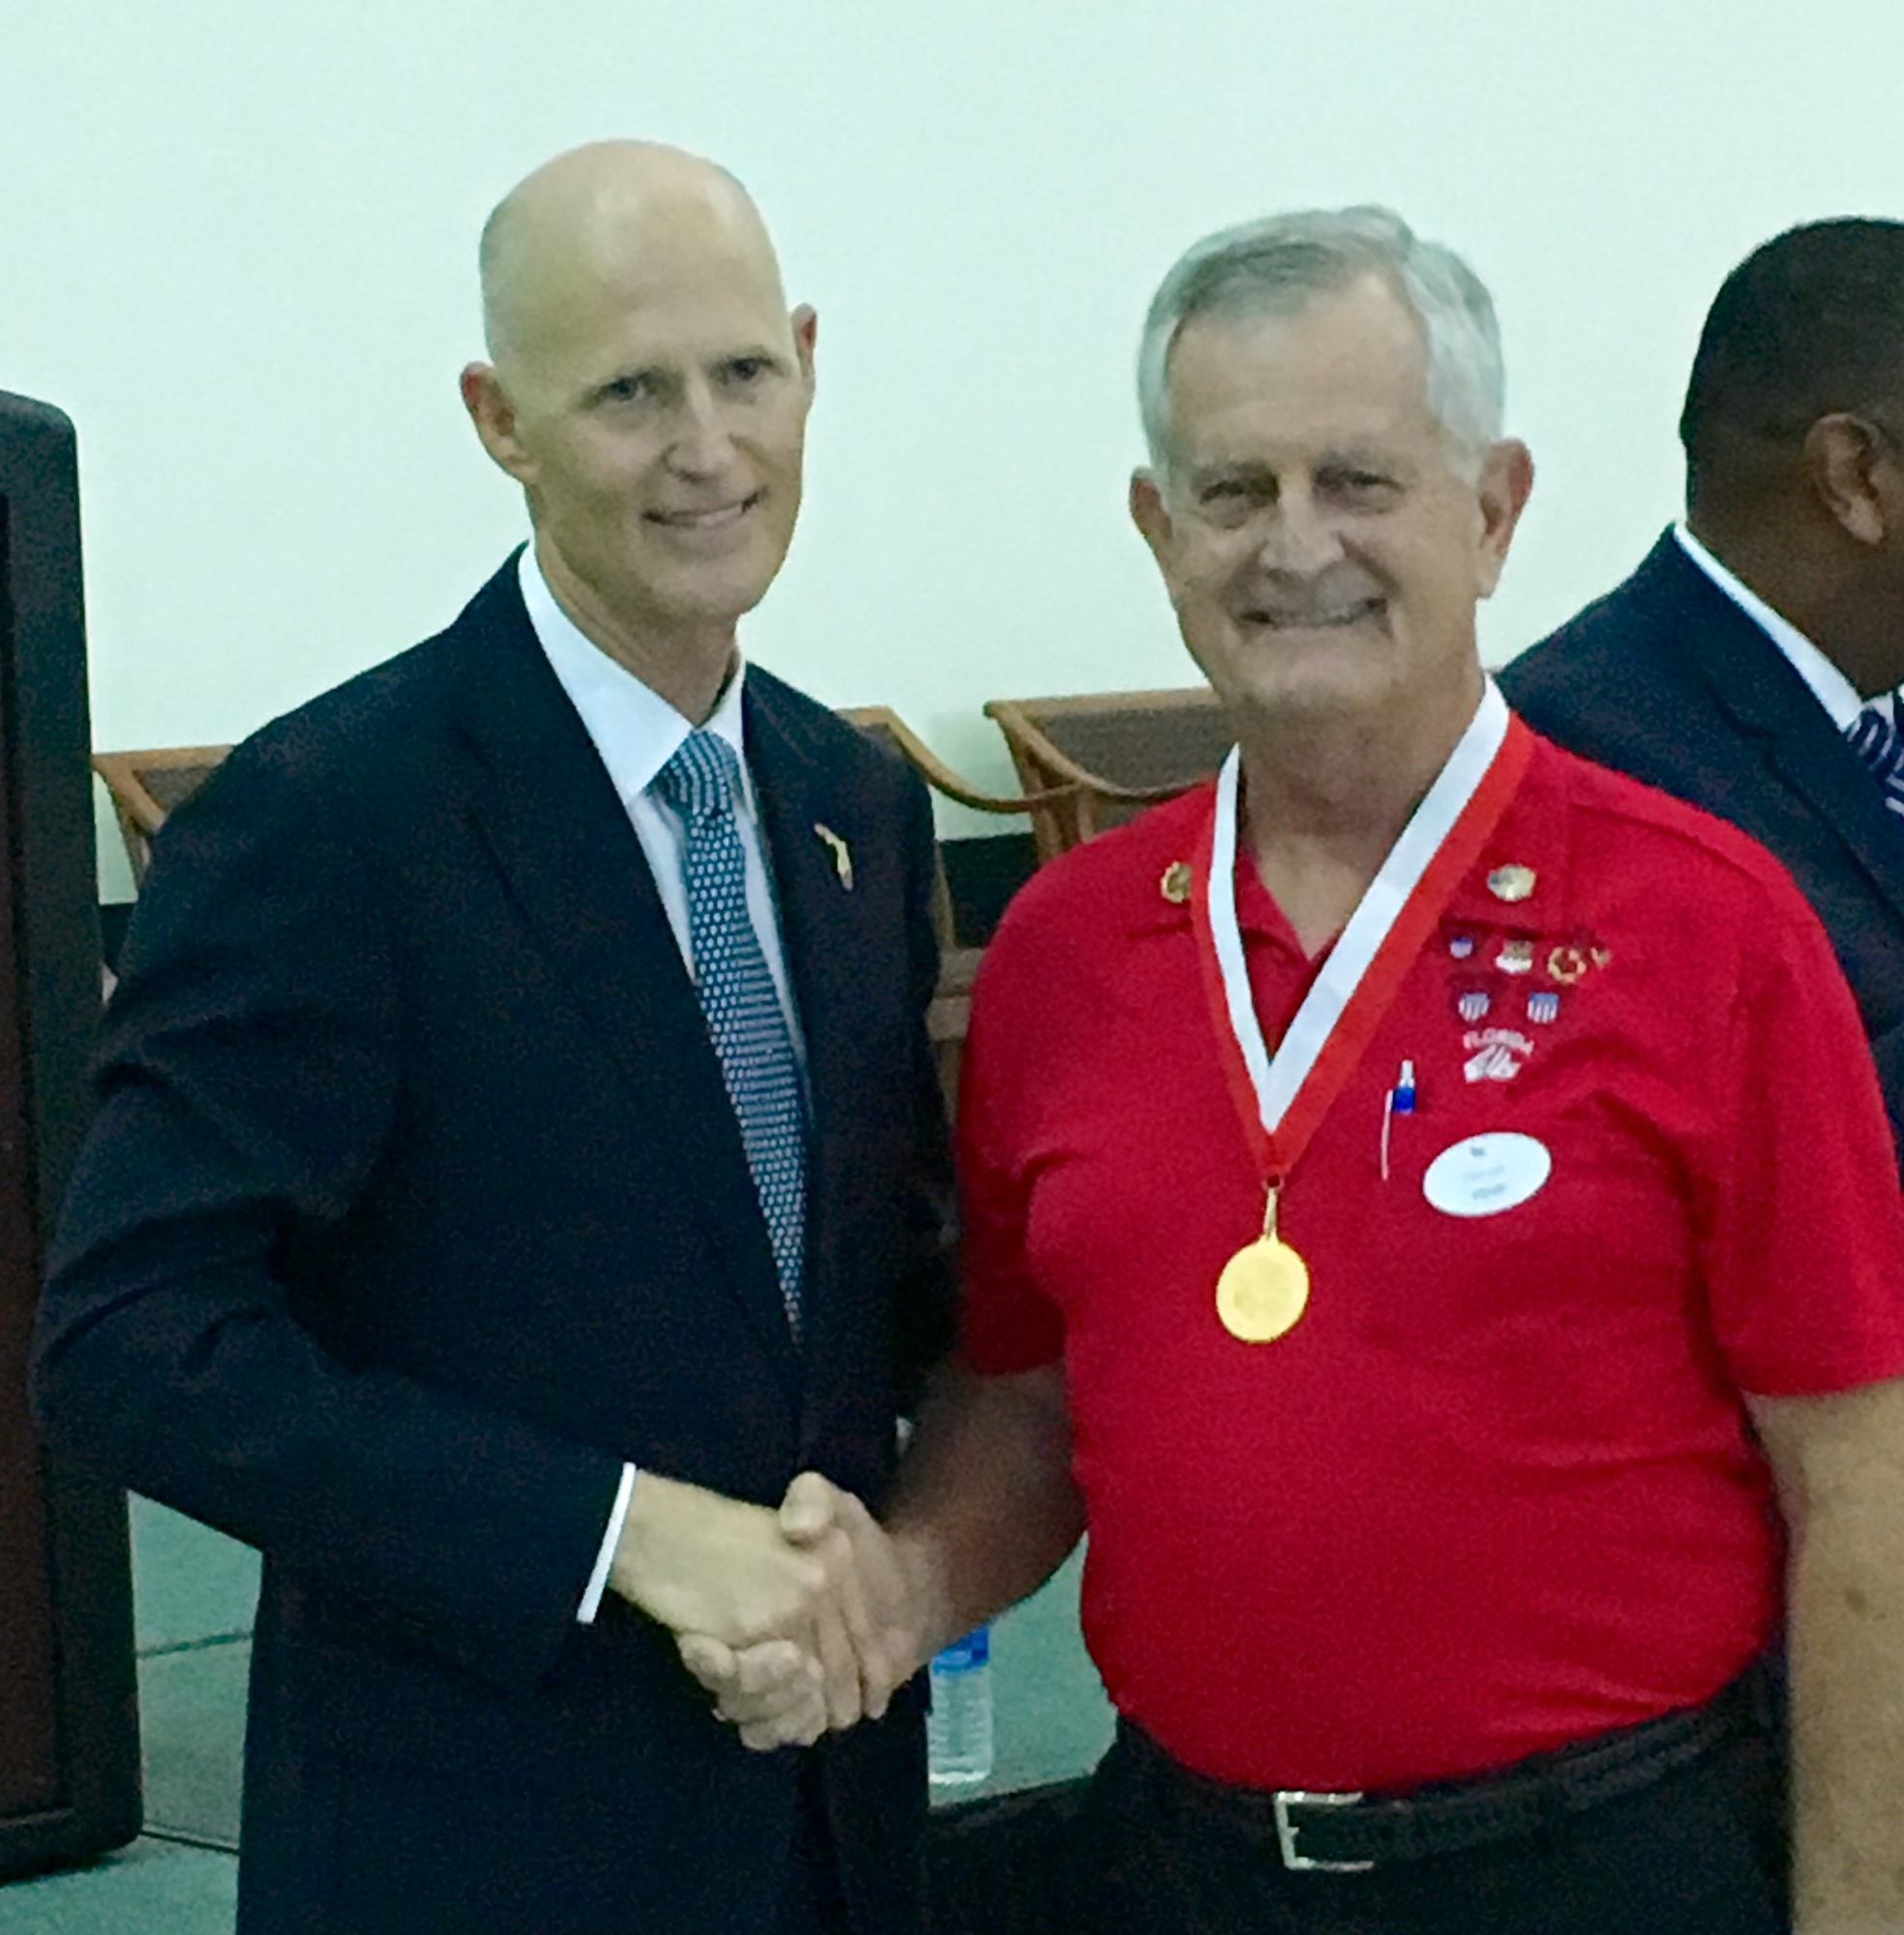 Gov. Rick Scott with Steven Carruthers